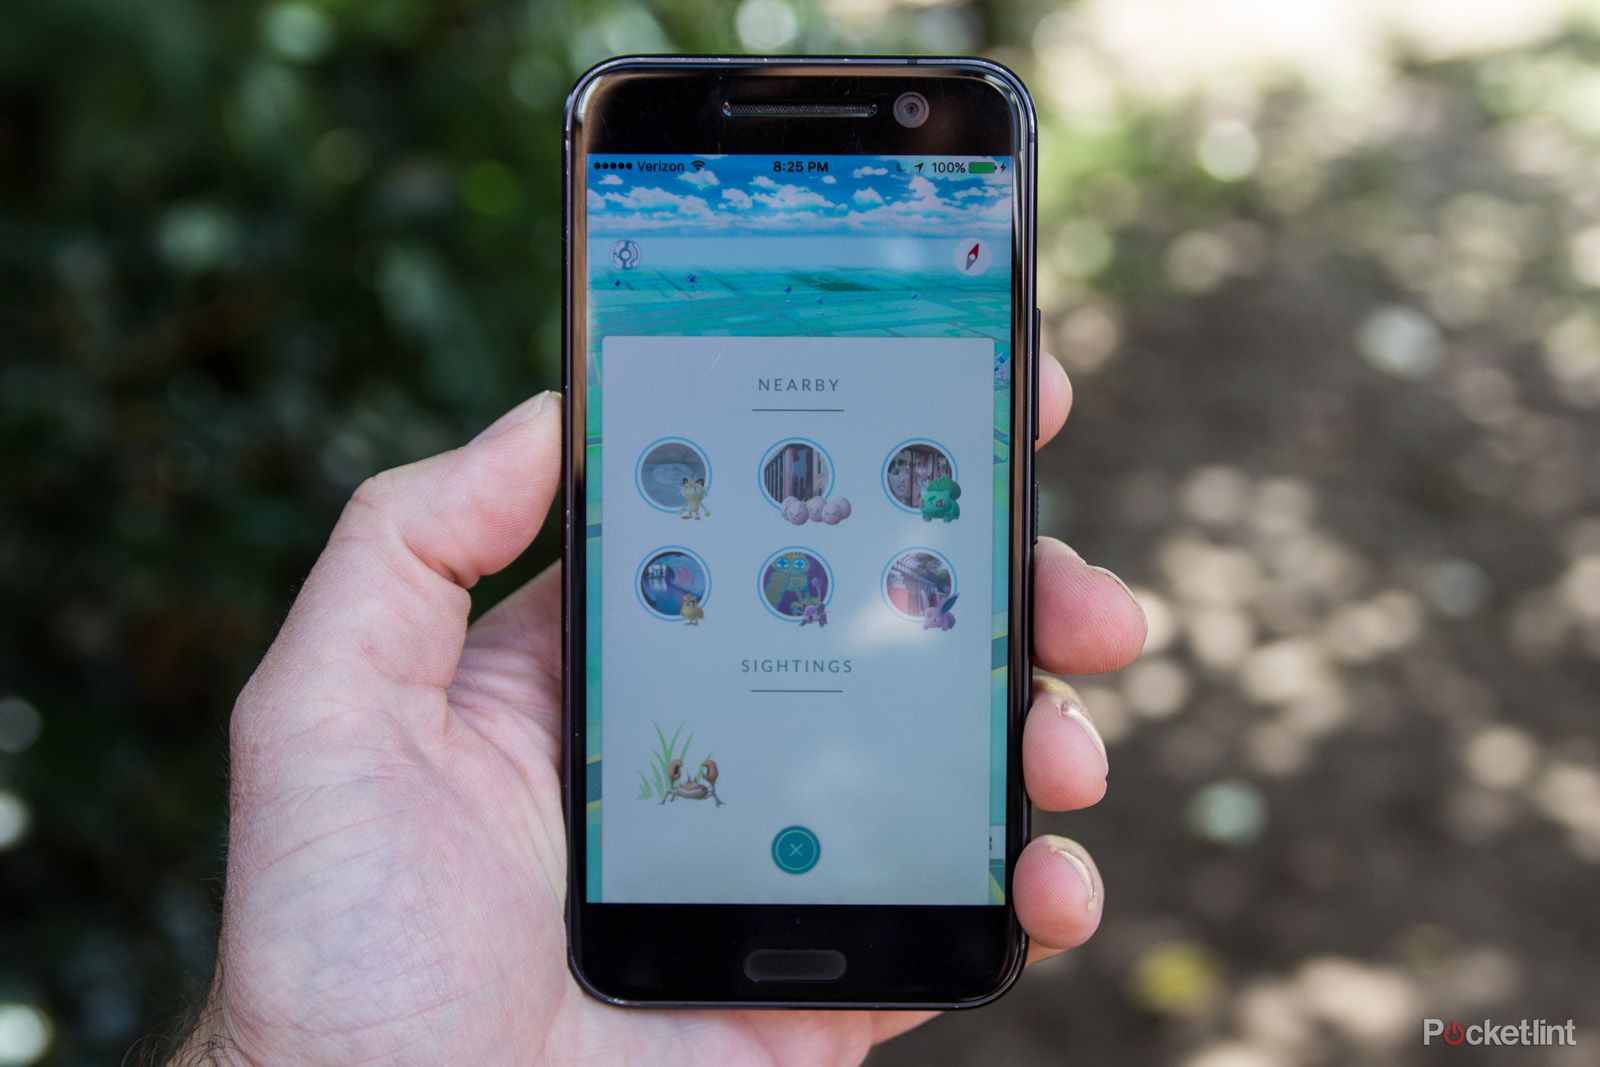 pokemon go sightings and nearby will super charge maps and help you find pokemon image 1